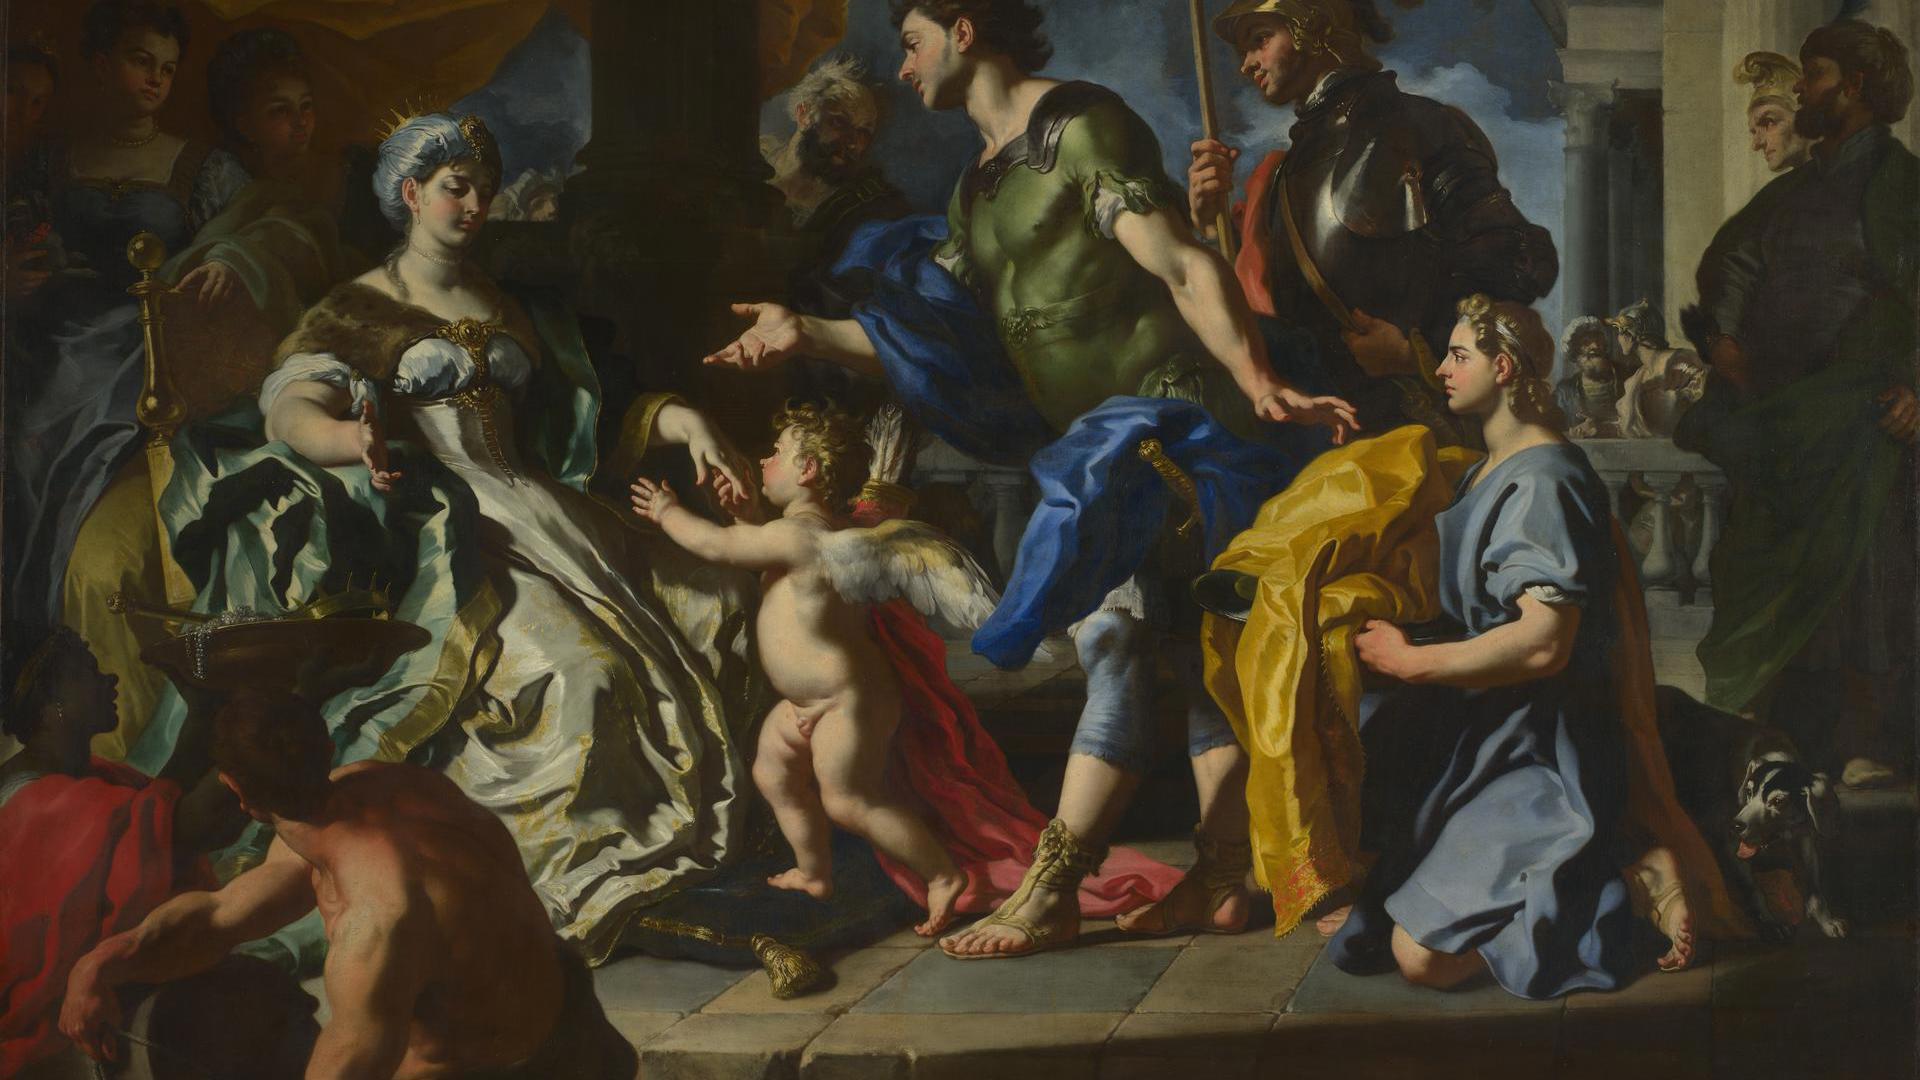 Dido receiving Aeneas and Cupid disguised as Ascanius by Francesco Solimena